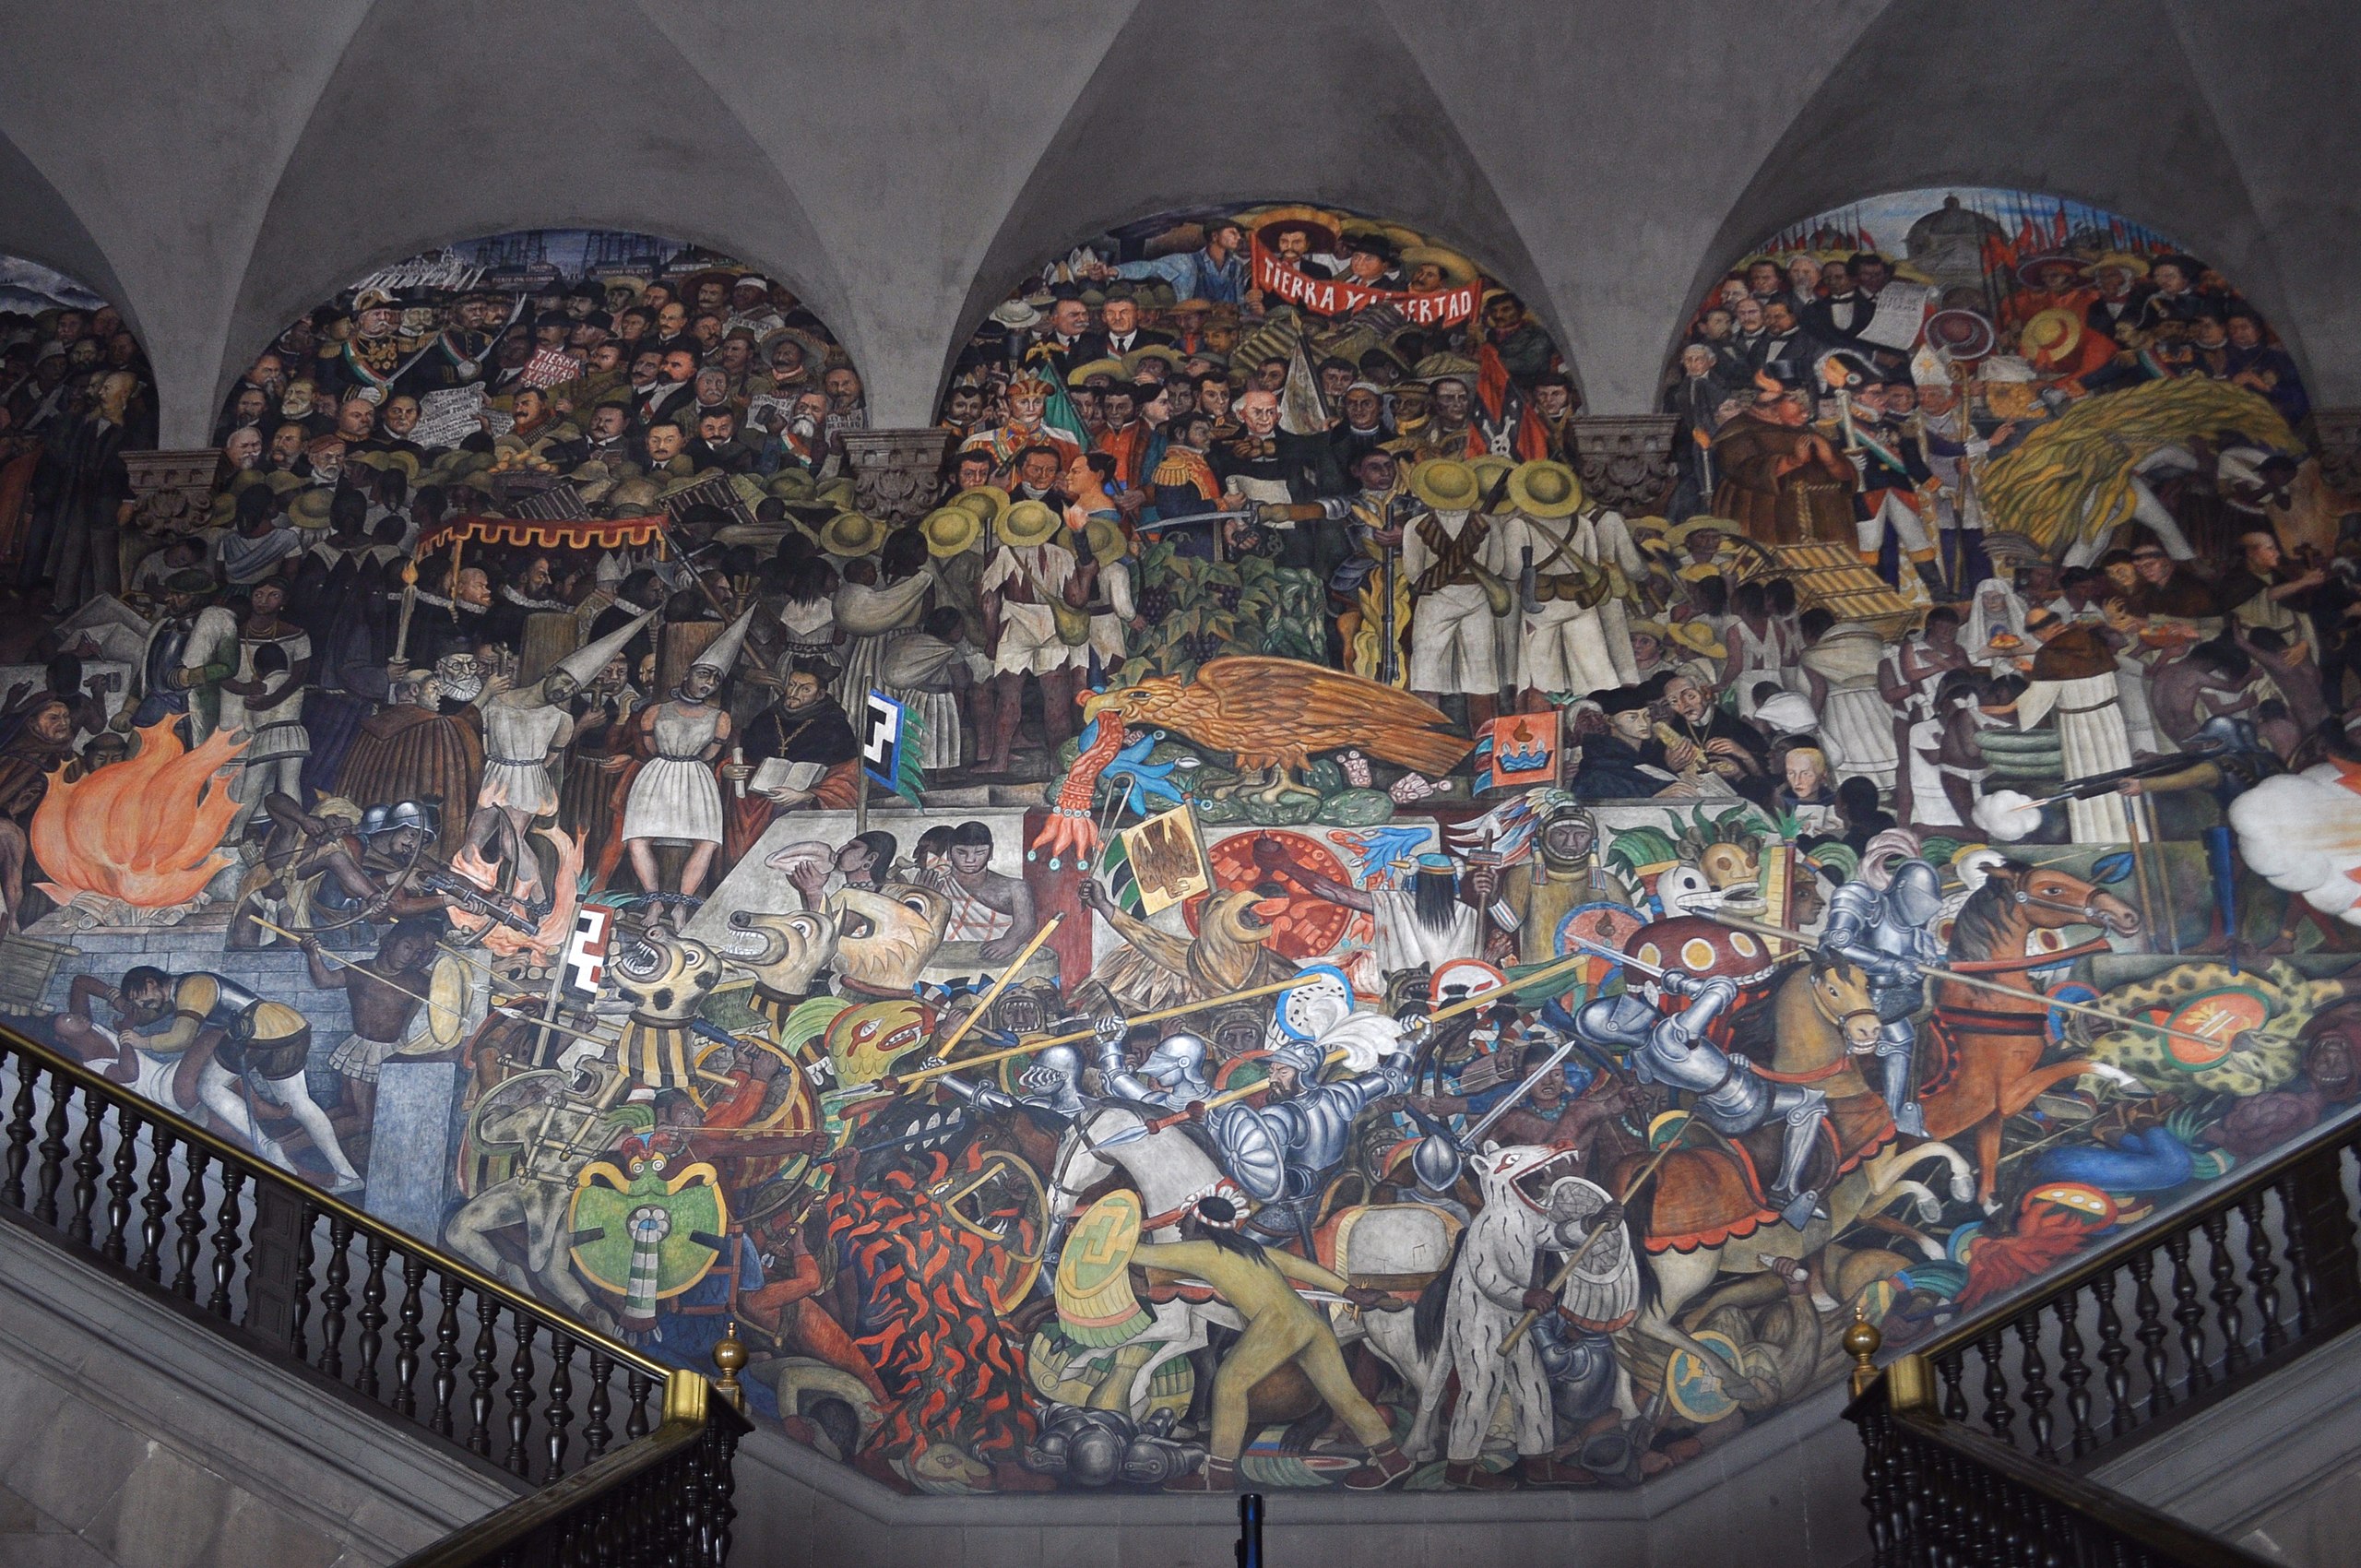 West wall: Diego Rivera, “From the Conquest to 1930,” History of Mexico murals, 1929–30, fresco, Palacio Nacional, Mexico City 